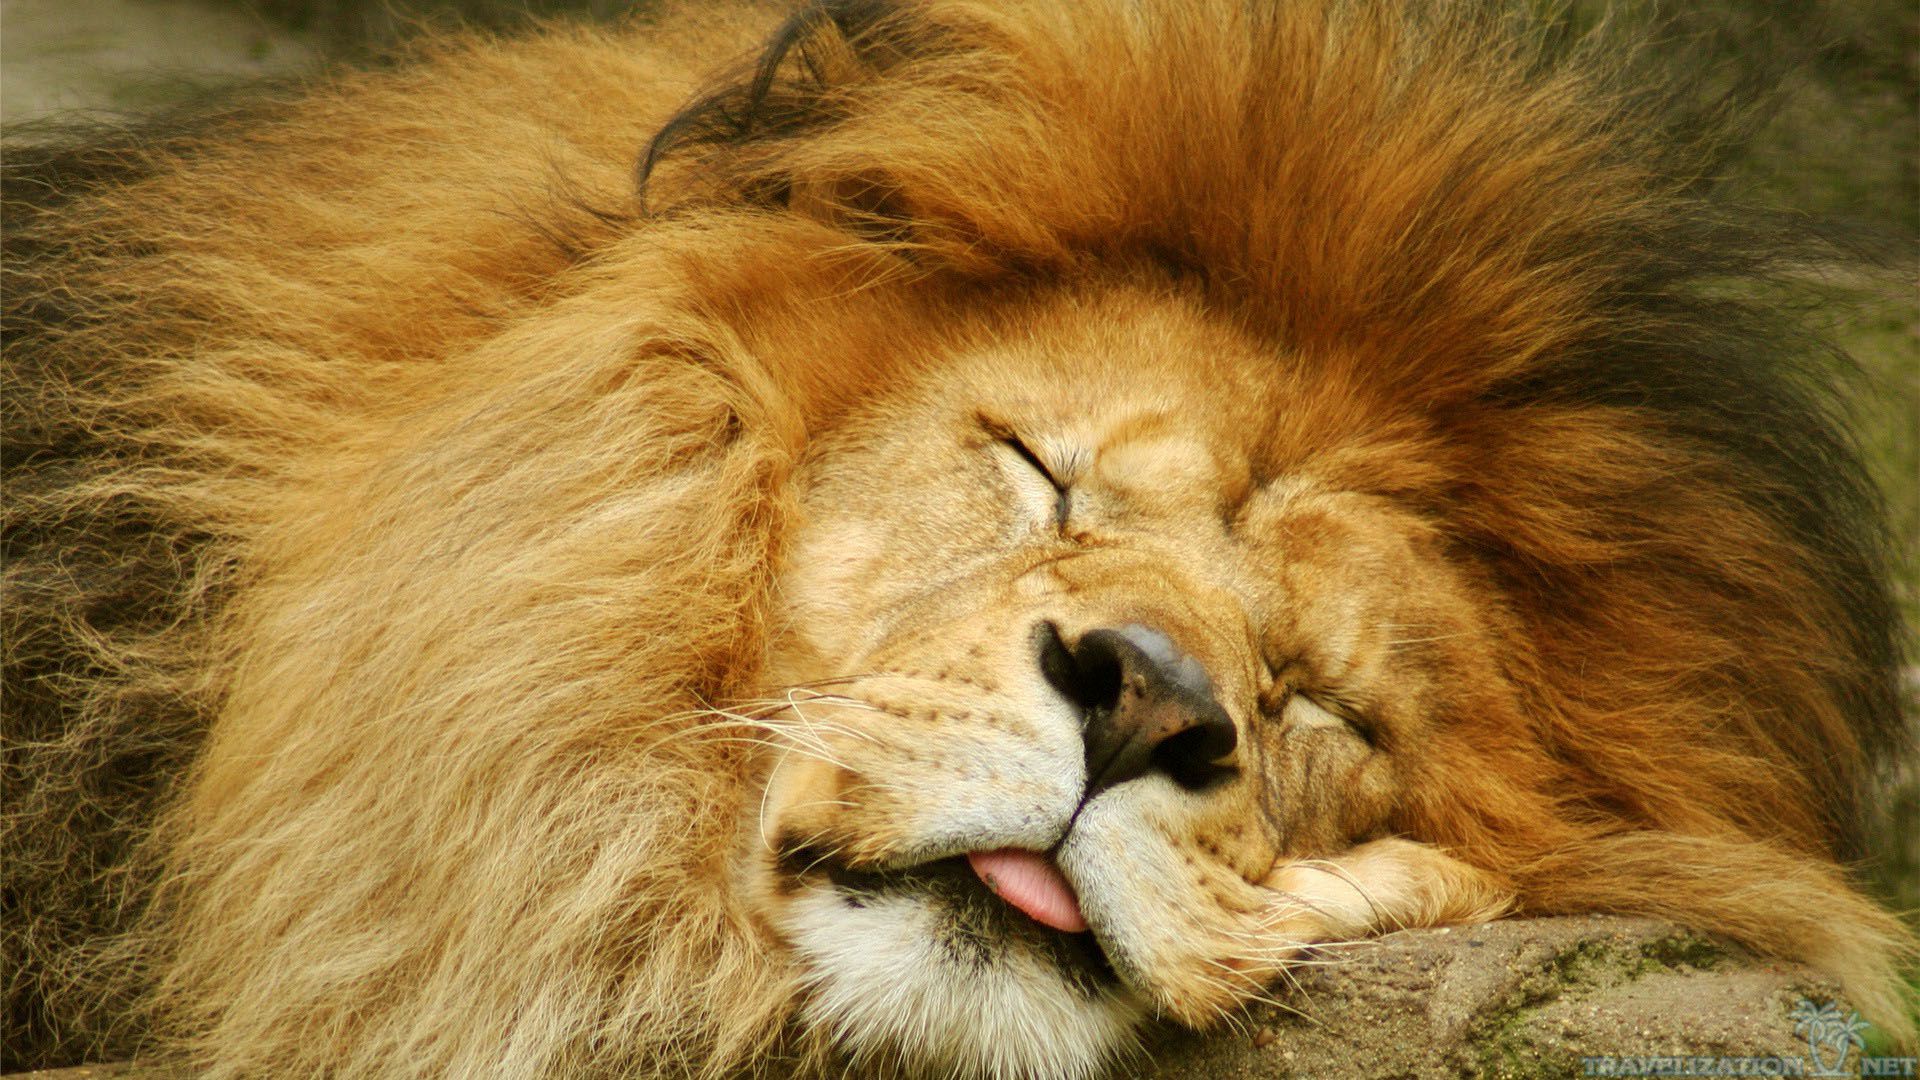 You can find Cute Sleeping Moment Lion wallpapers in many resolution such as 1024×768, 1280×1024, 1366×768, ...